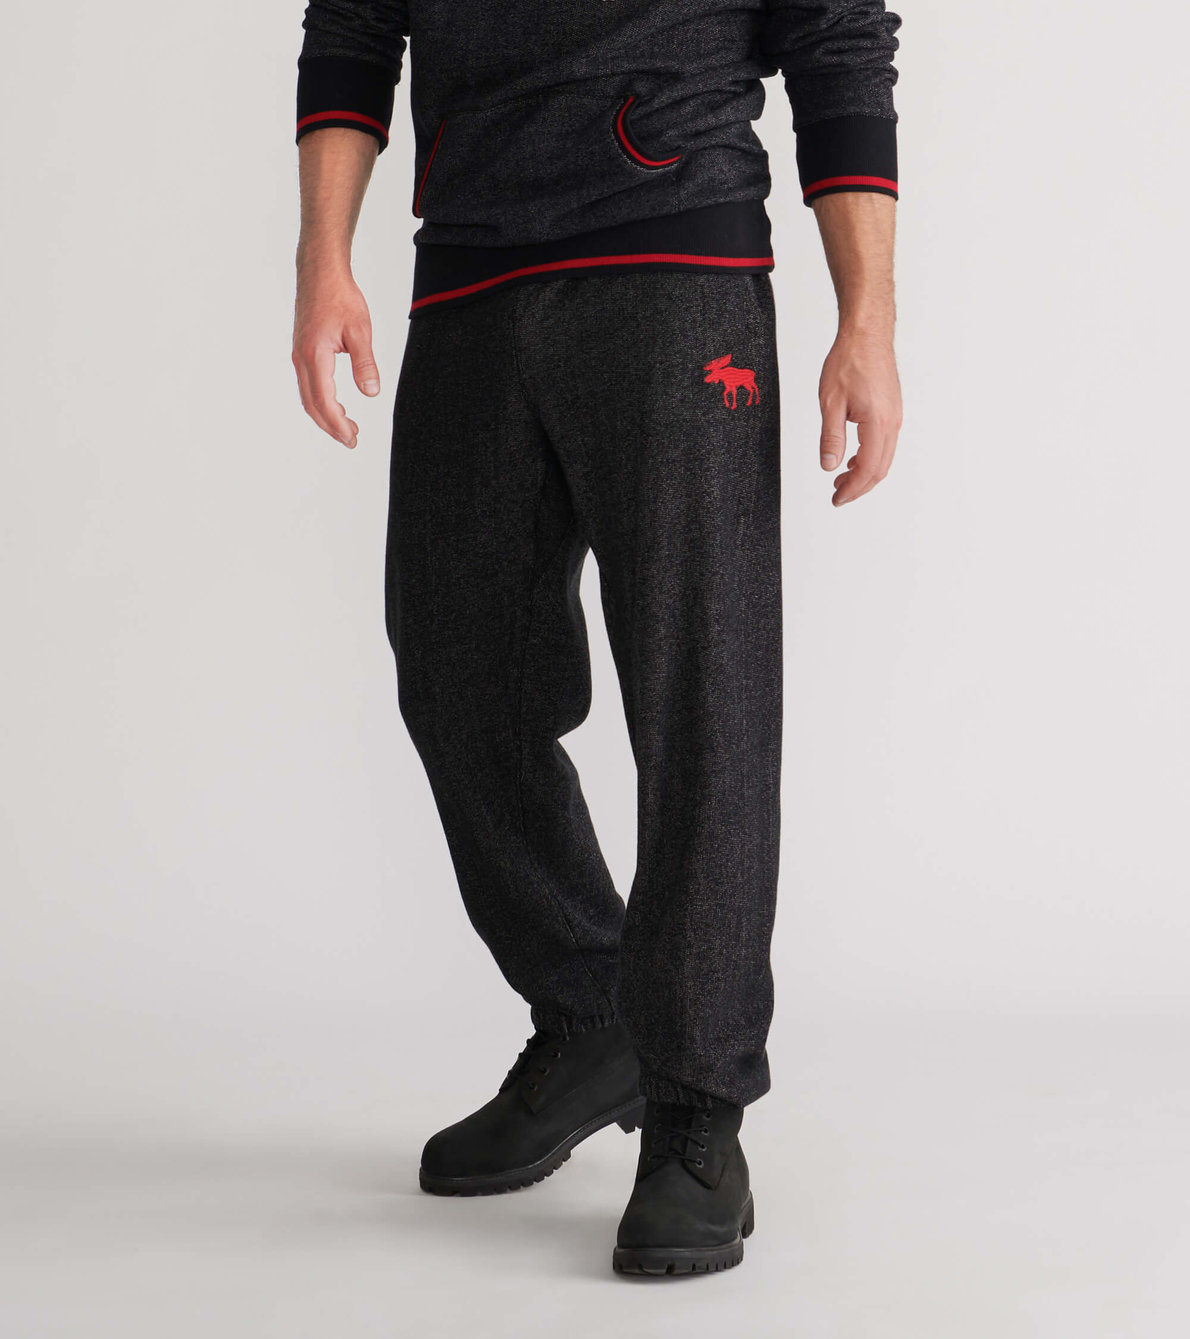 View larger image of Charcoal Moose Men's Heritage Joggers